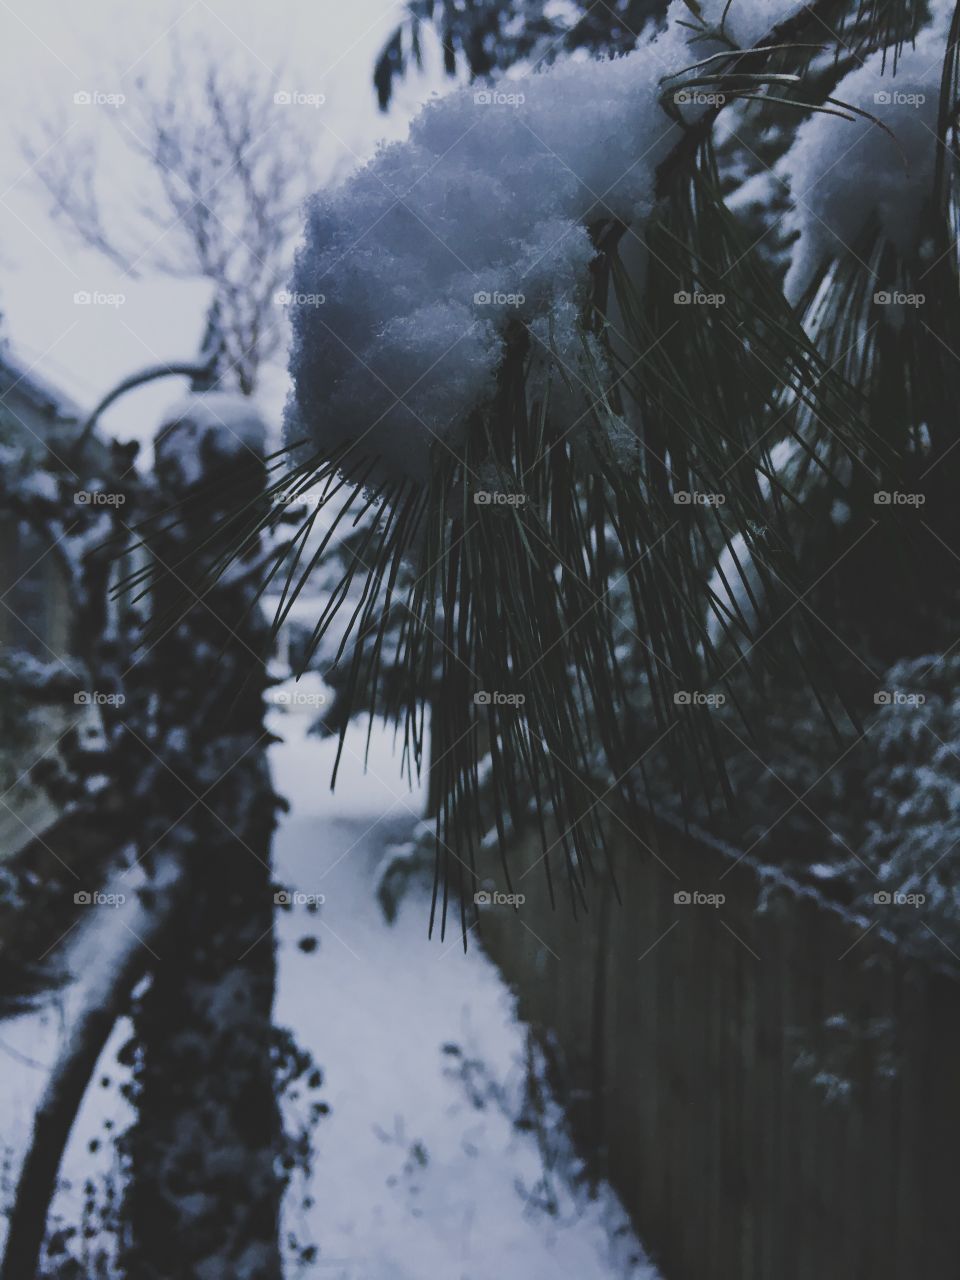 Fresh powdery snow on a white pine tree branch during winter with a snowy wooden fence in soft background 